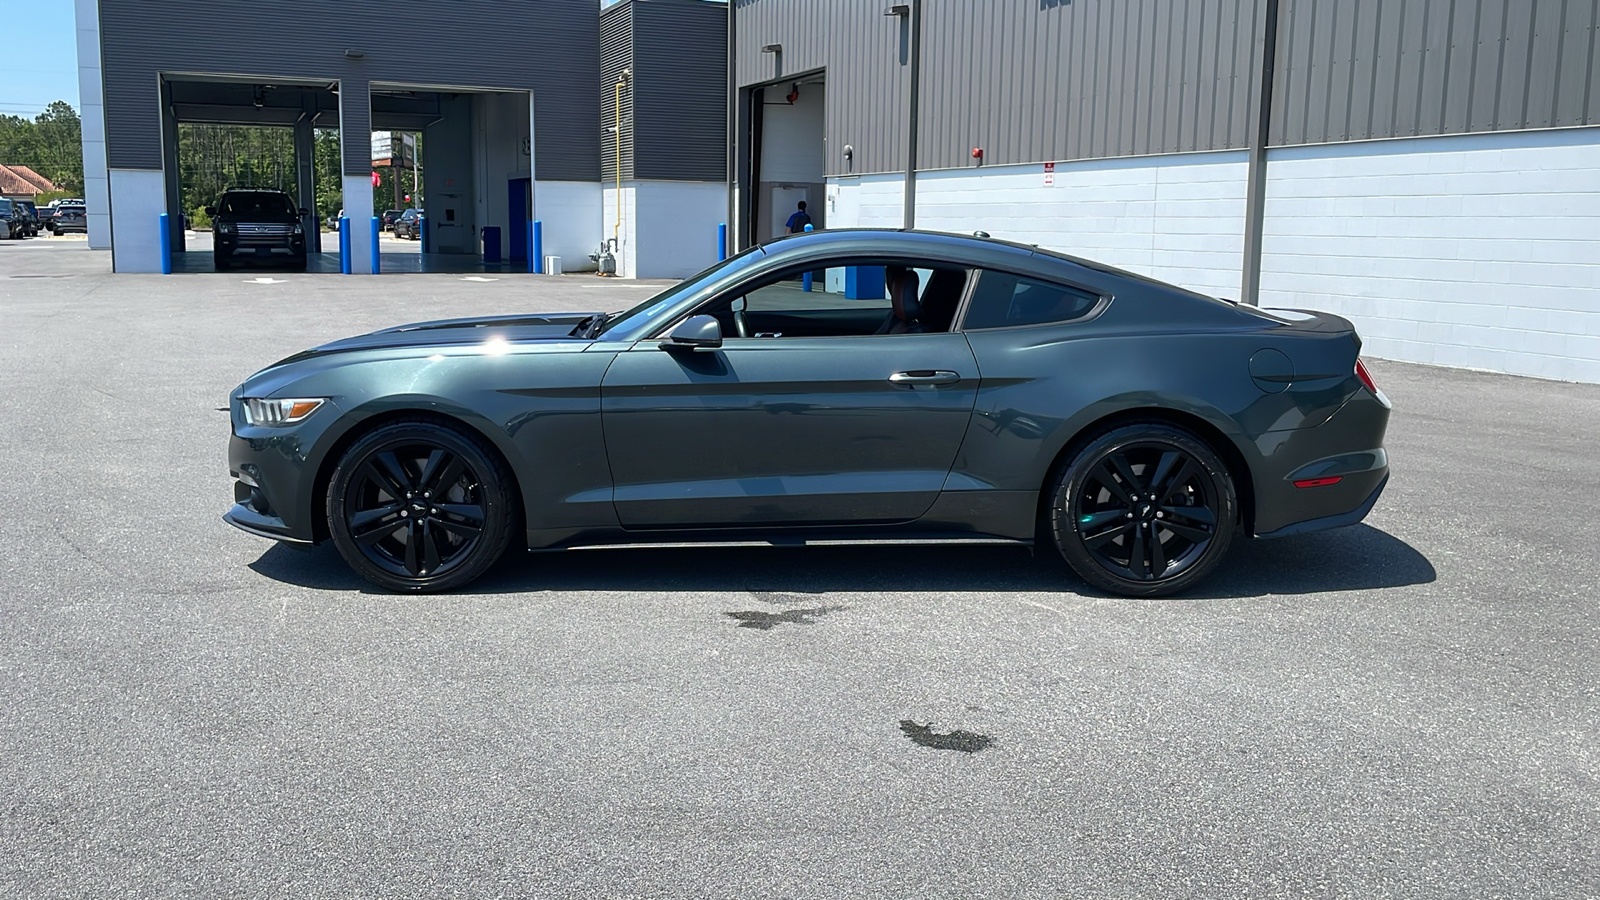 2015 Ford Mustang EcoBoost Premium 2